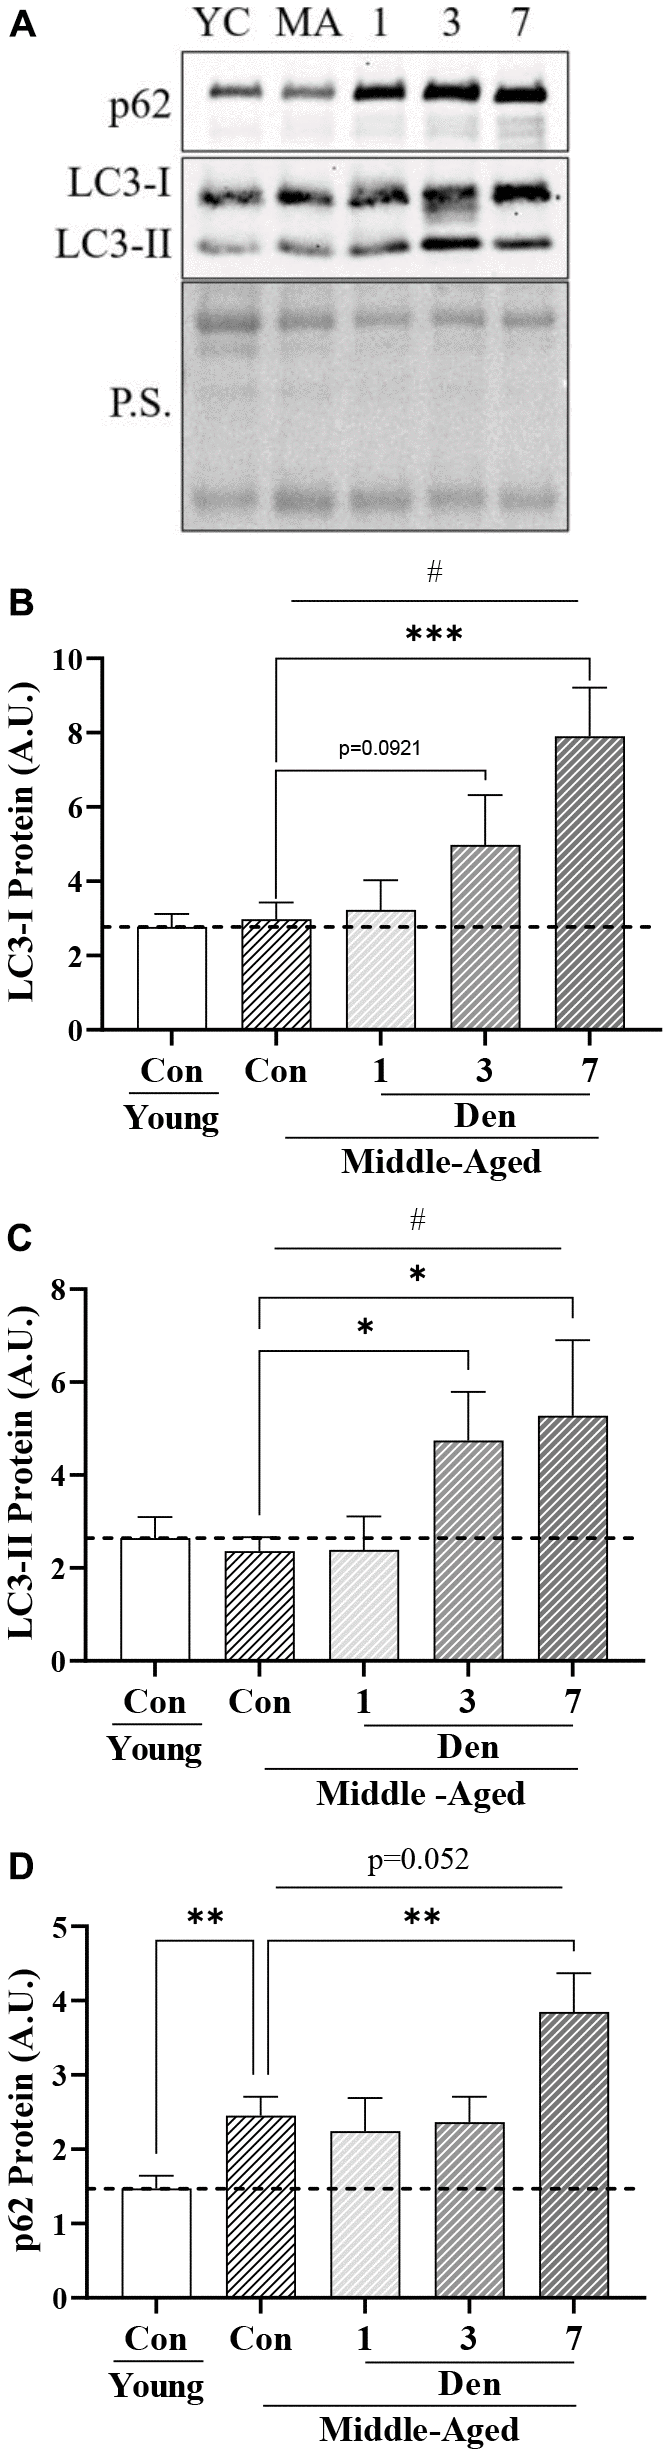 Autophagosomal proteins in young and middle-aged control and denervated skeletal muscle. (A) Representative western blots for LC3-I, II and p62 protein. Quantification of (B) LC3-I protein; (C) LC3-II protein; and (D) p62 protein in skeletal muscle. All values were corrected to Ponceau stain (P.S.), and values are reported as means ± SEM, in A.U. *p